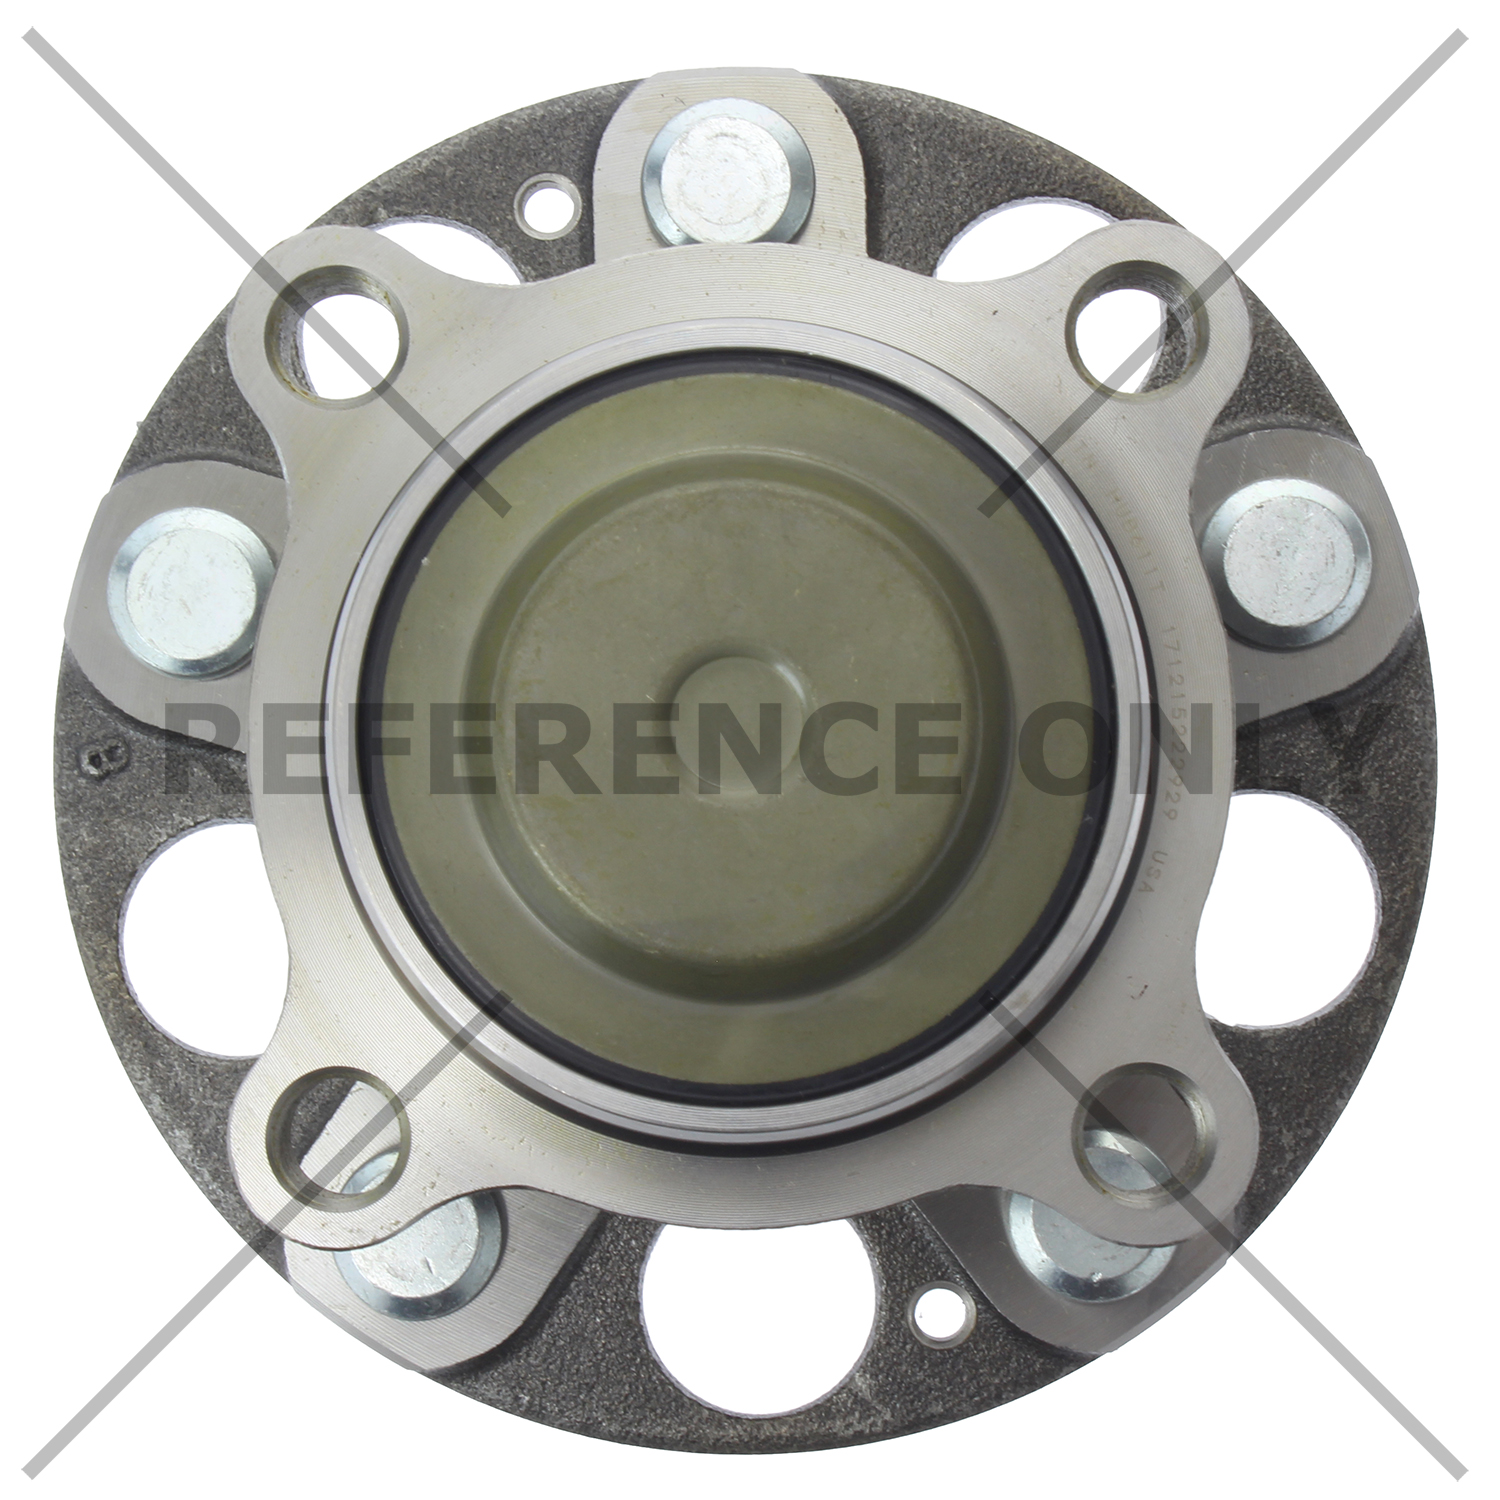 Wheel Bearing and Hub Assembly-Premium Hubs Rear Centric 406.40005